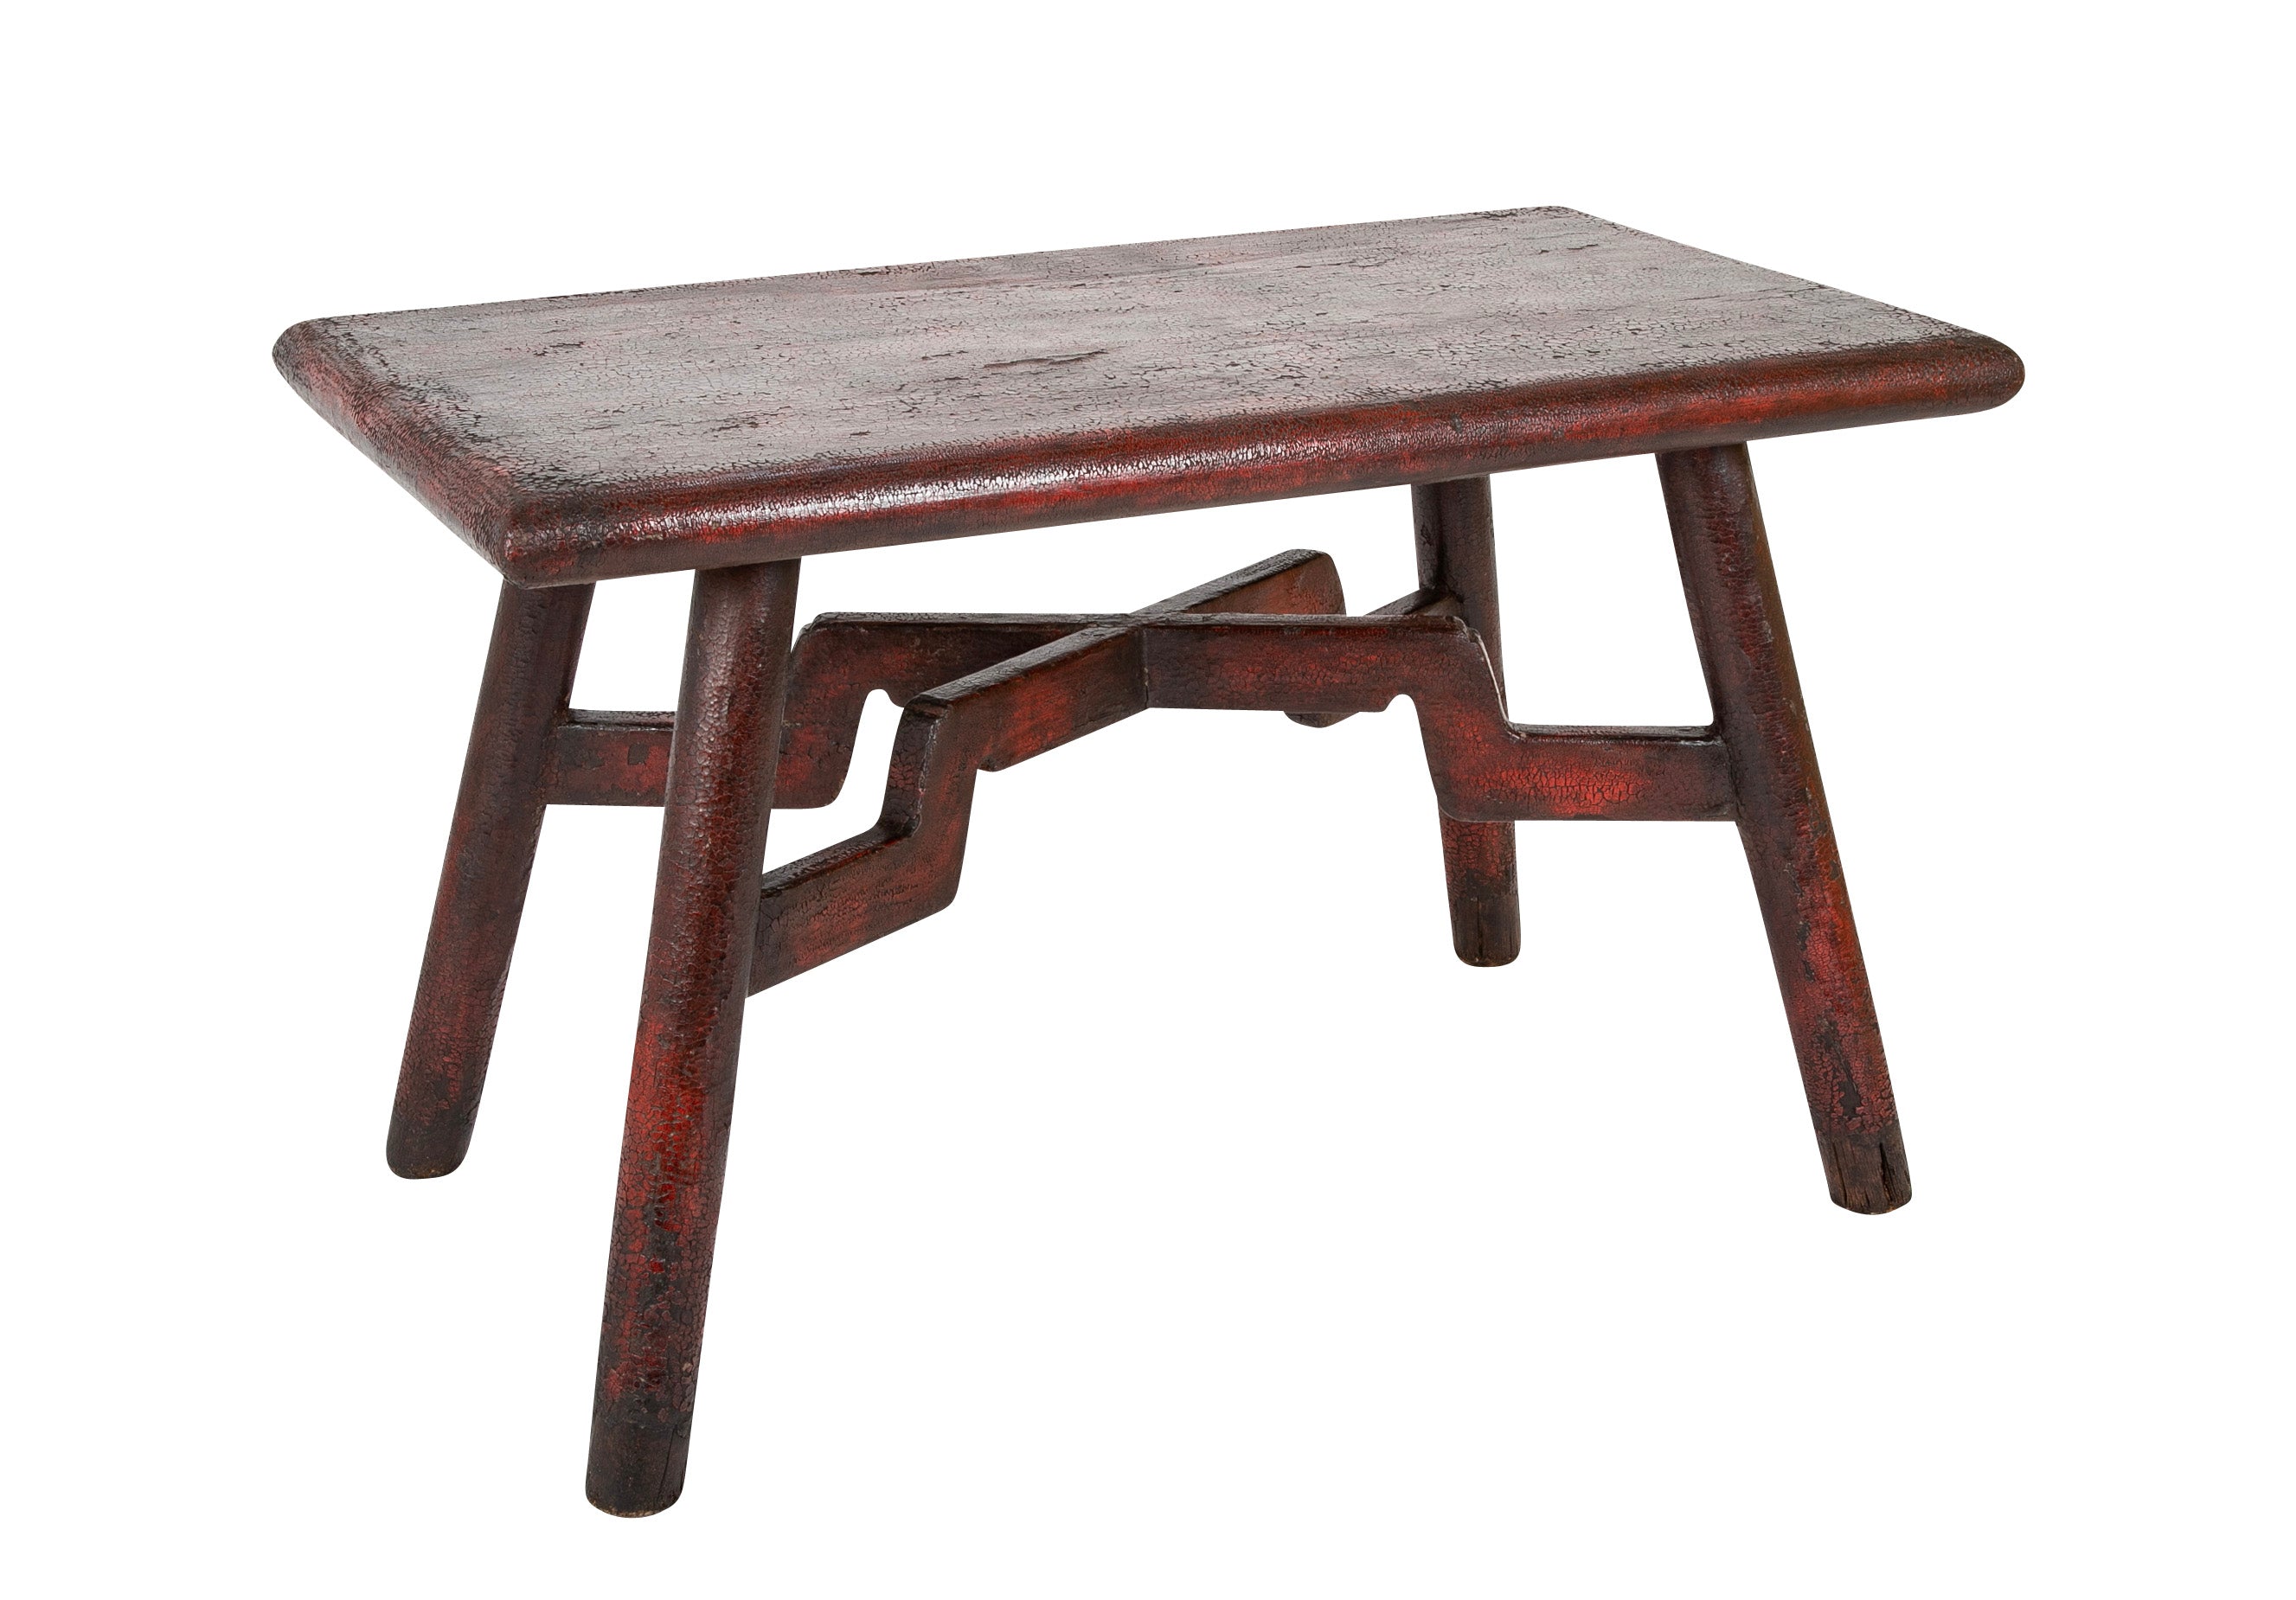 Early 20th Century Chinese Deep Red Painted Wood Table